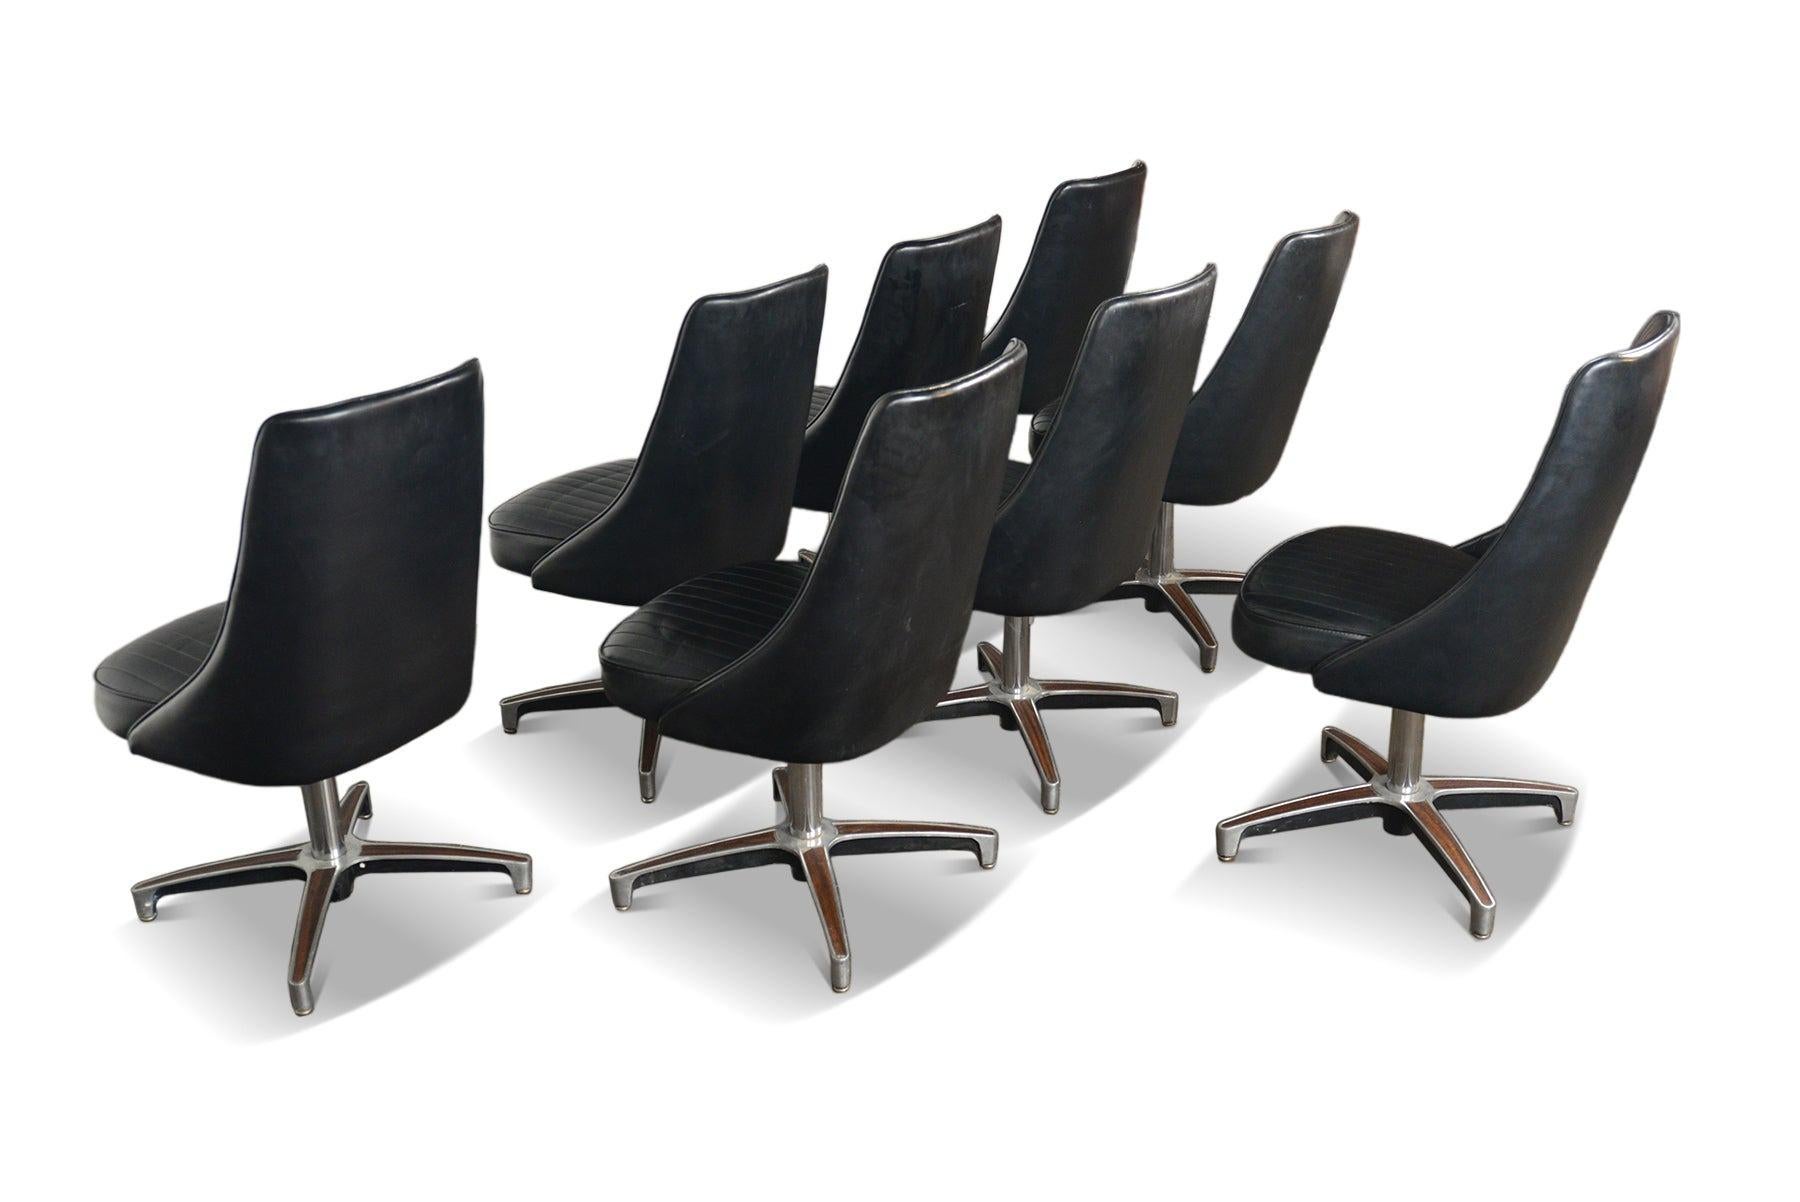 Set of Eight Chromcraft Swivel Dining Chairs In Black Vinyl In Good Condition For Sale In Berkeley, CA